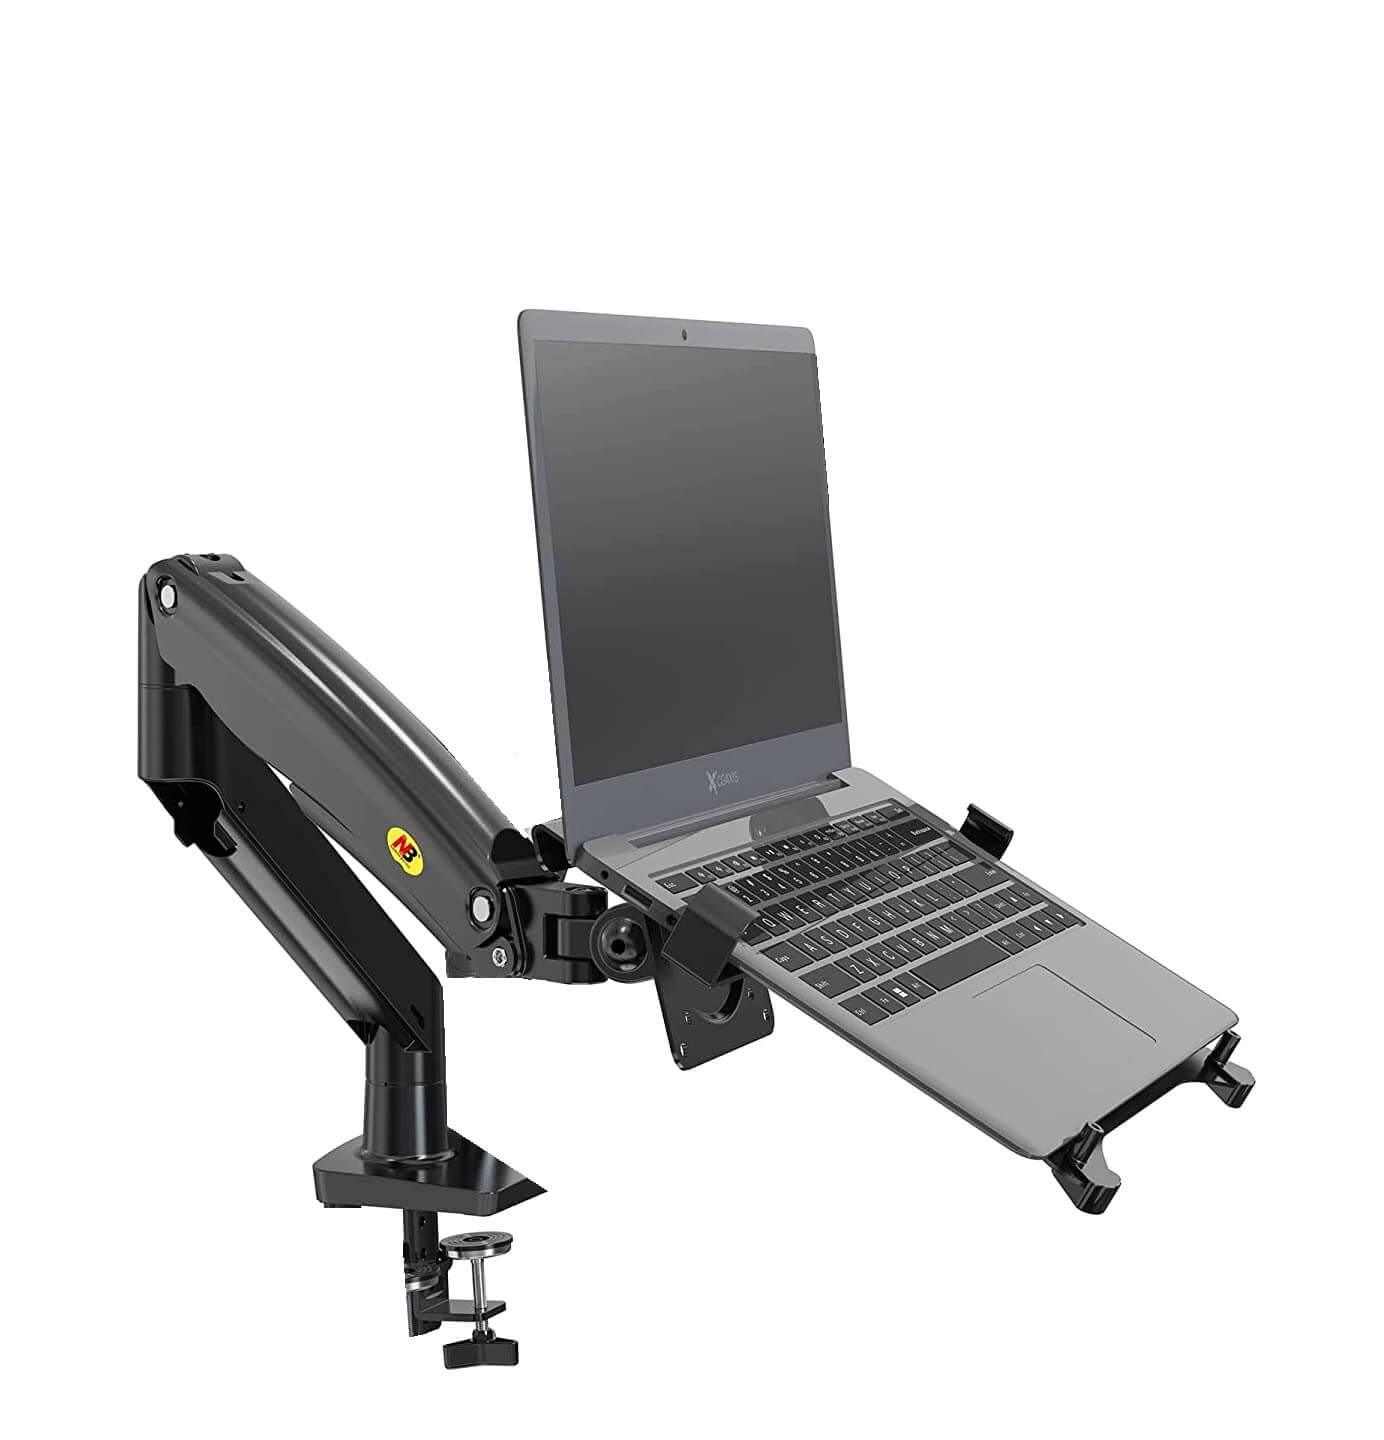 17 to 27 inch Gas Strut LED Monitor Desk Arm with Laptop Tray 360 Degree Swivel tilt F80 Fp2 - GADGET WAGON Gas Spring Arm